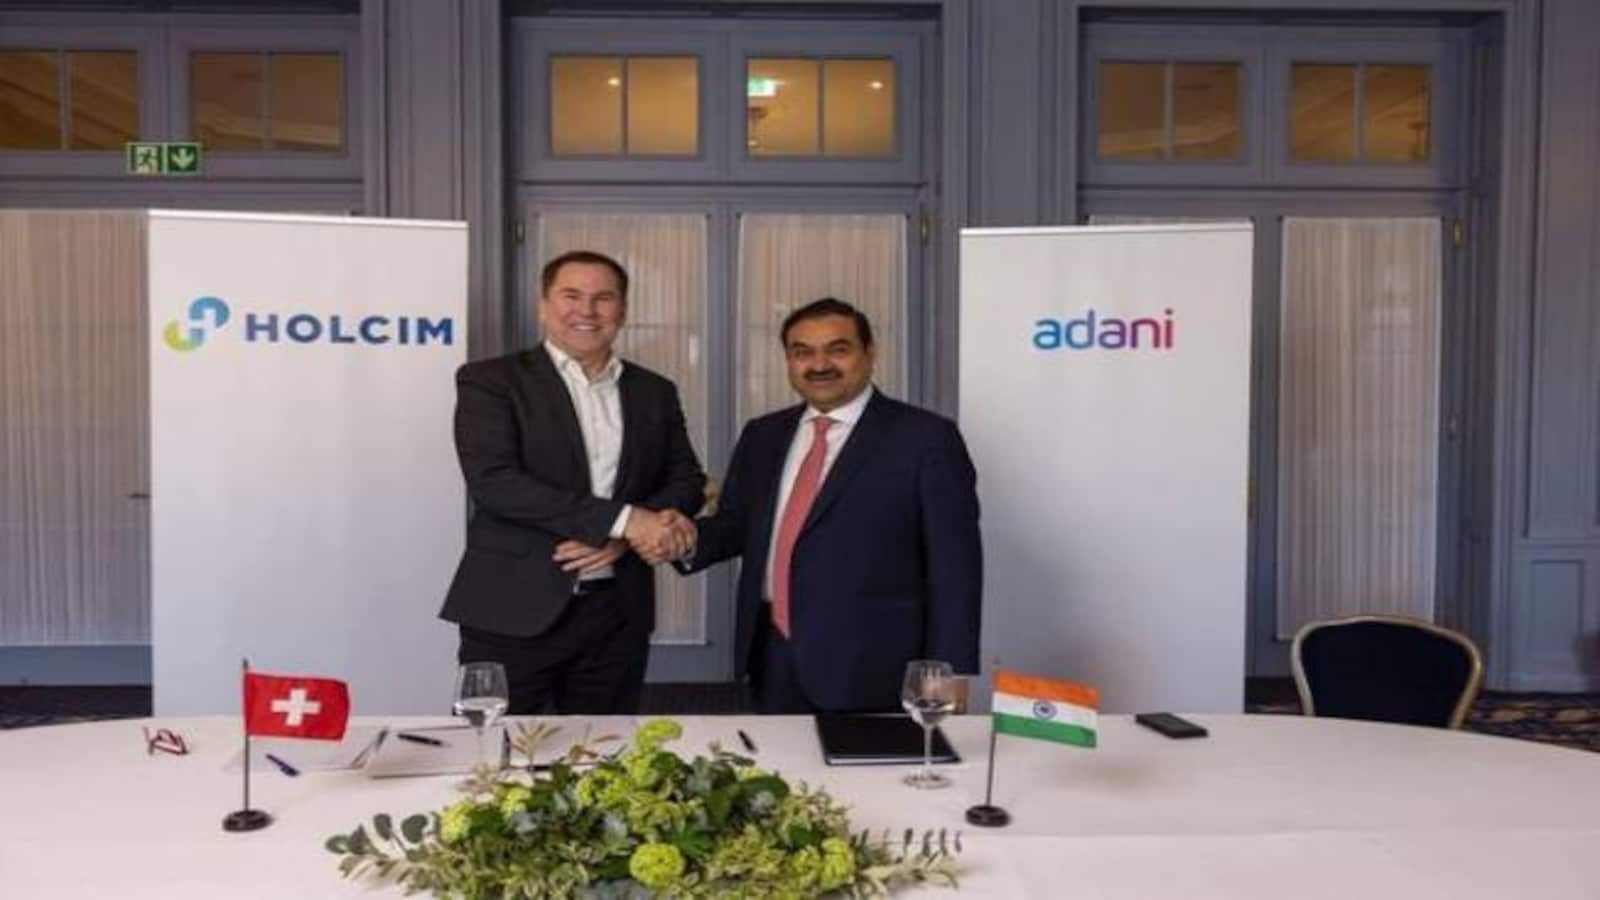 CCI approves Adani Group’s Acquisition of Holcim’s Stake in Ambuja Cements